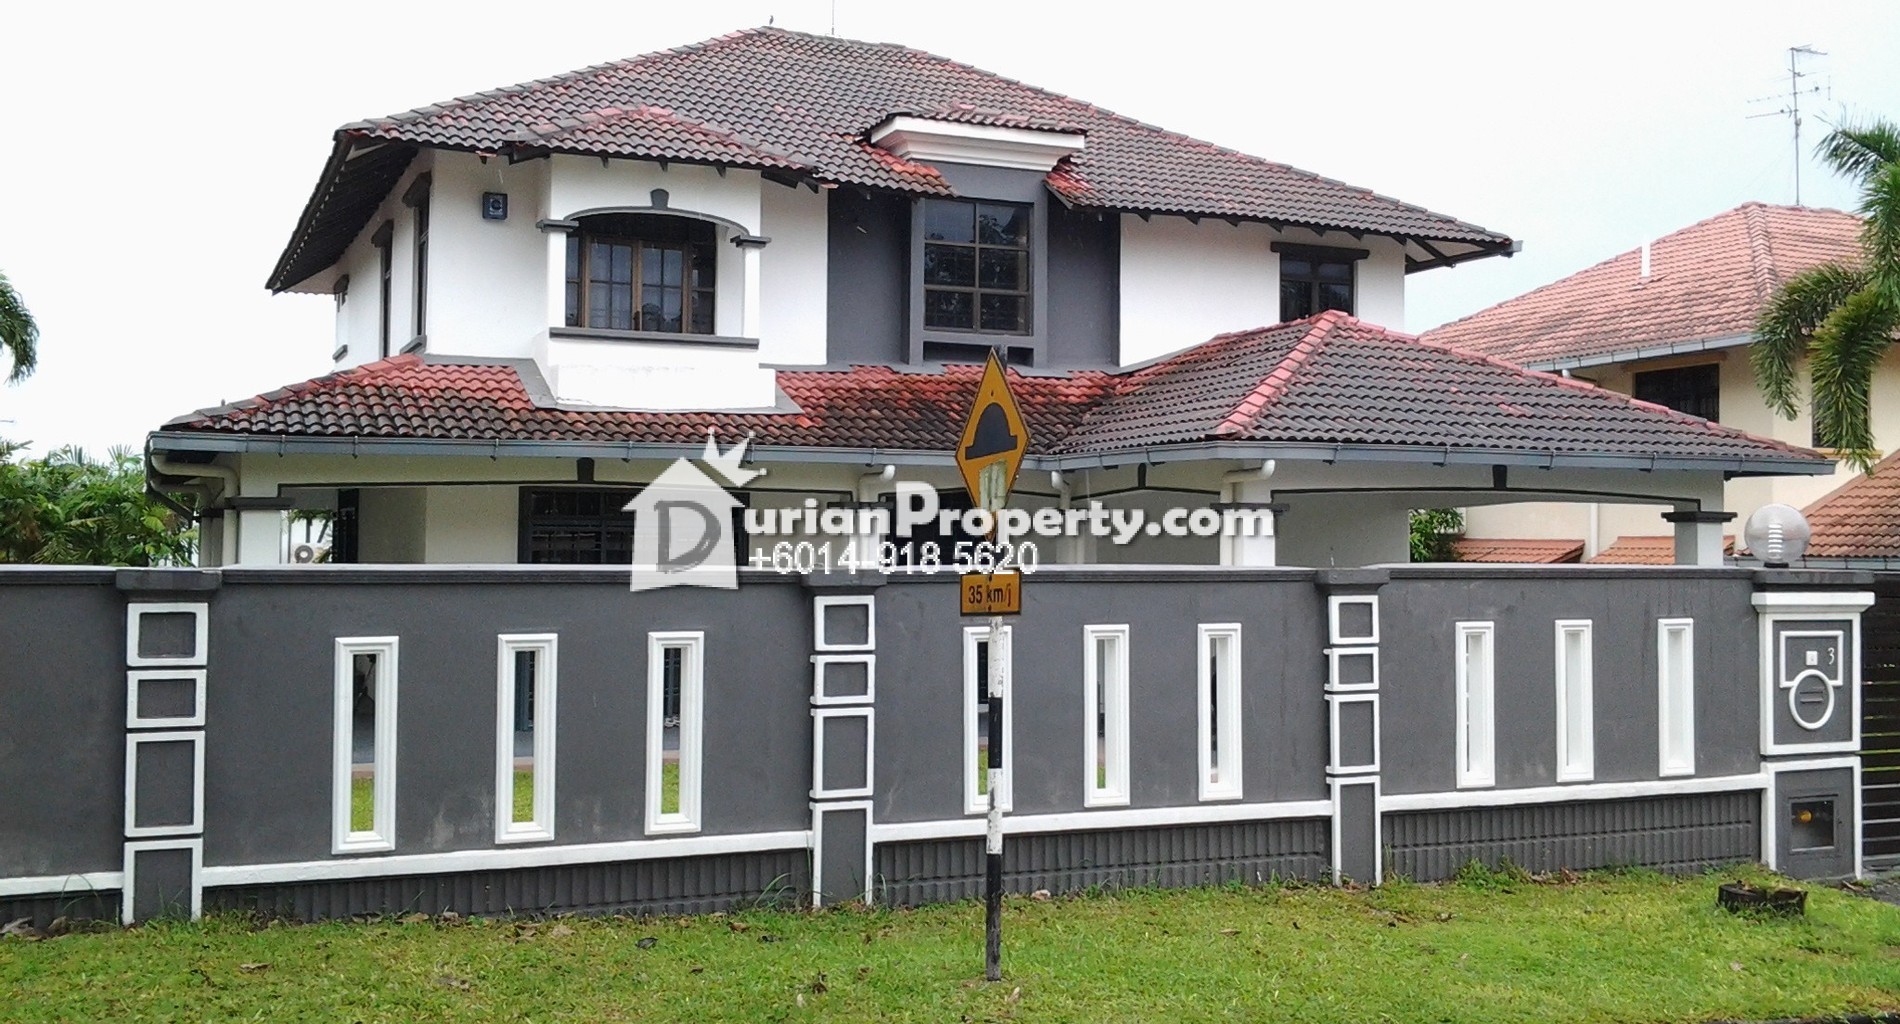 Bungalow House For Sale At Taman Bukit Rinting Masai For Rm 1 300 000 By Gill Durianproperty